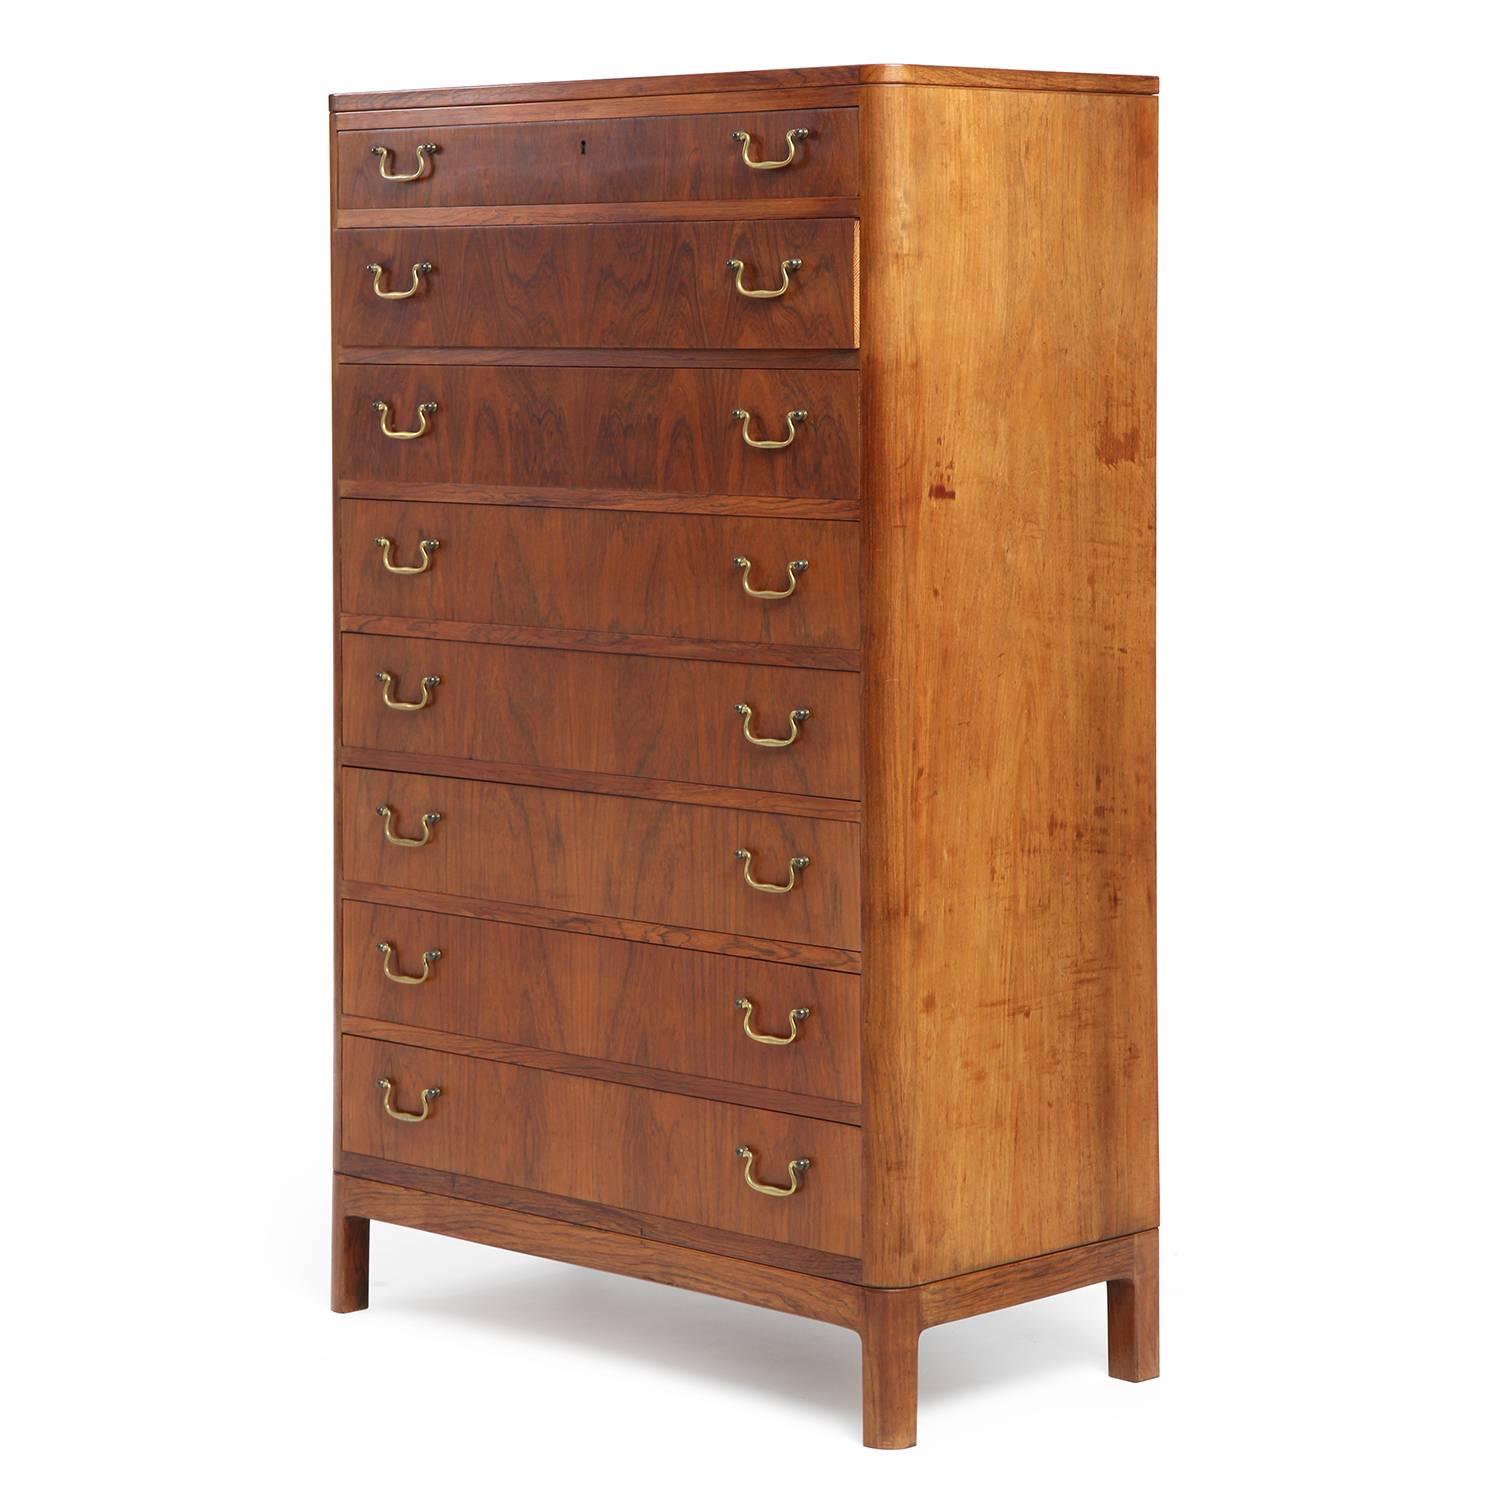 Patinated 1940s Danish Tall Rosewood Chest of Drawers by Ole Wanscher for A.J. Iversen